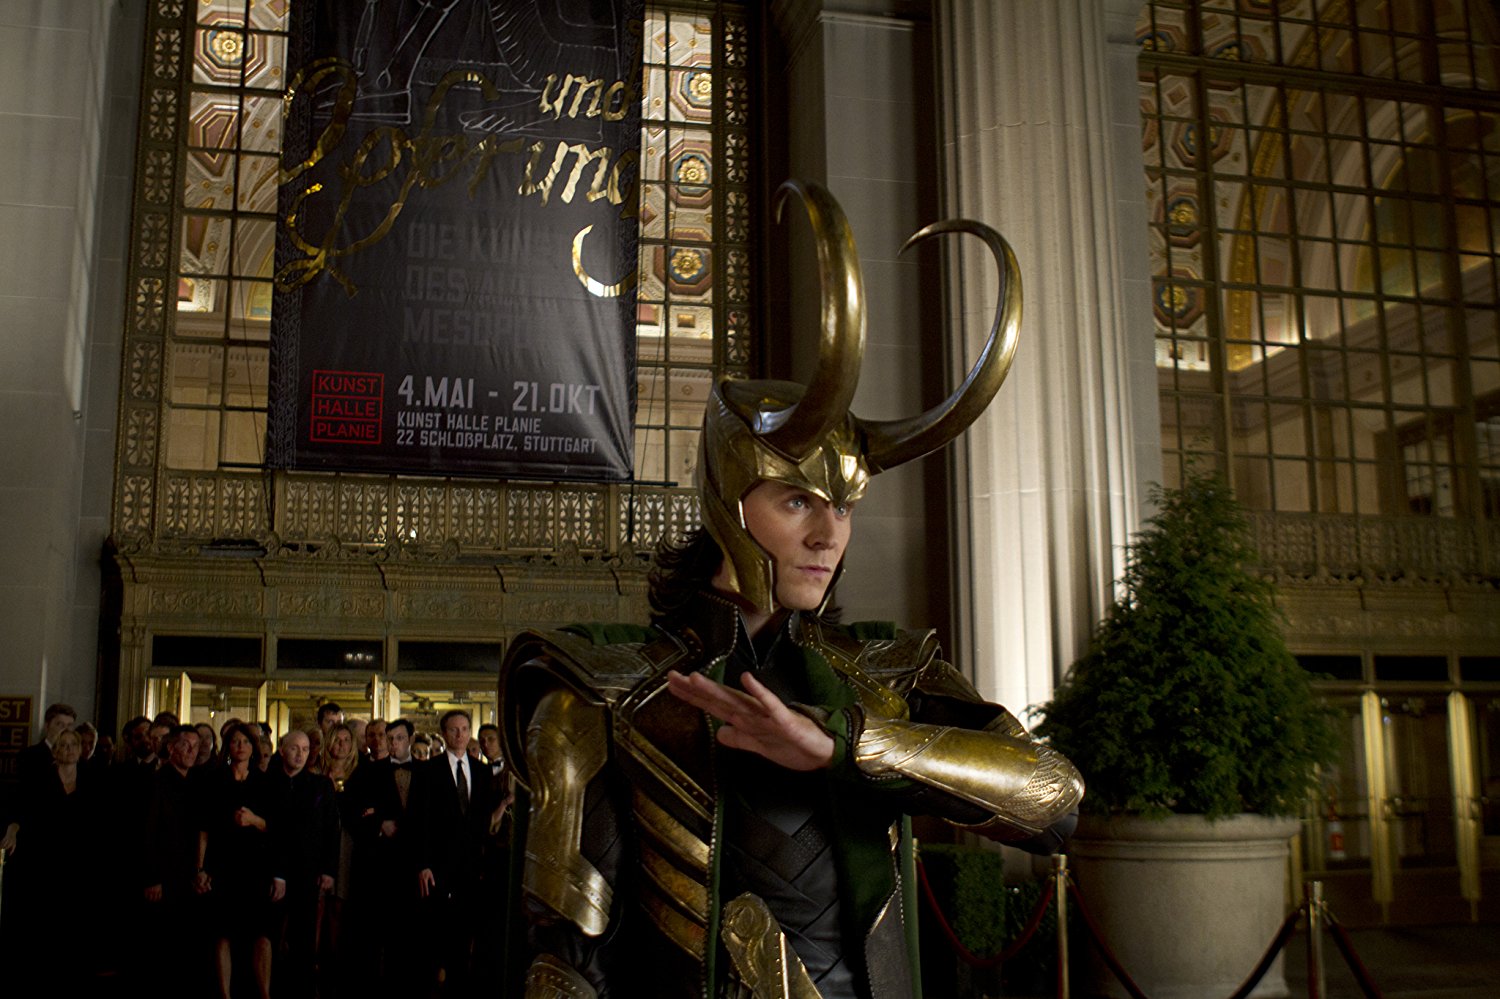 Character Loki,list of movies character - Thor: Ragnarok, Marvel's Guardians of the Galaxy ...